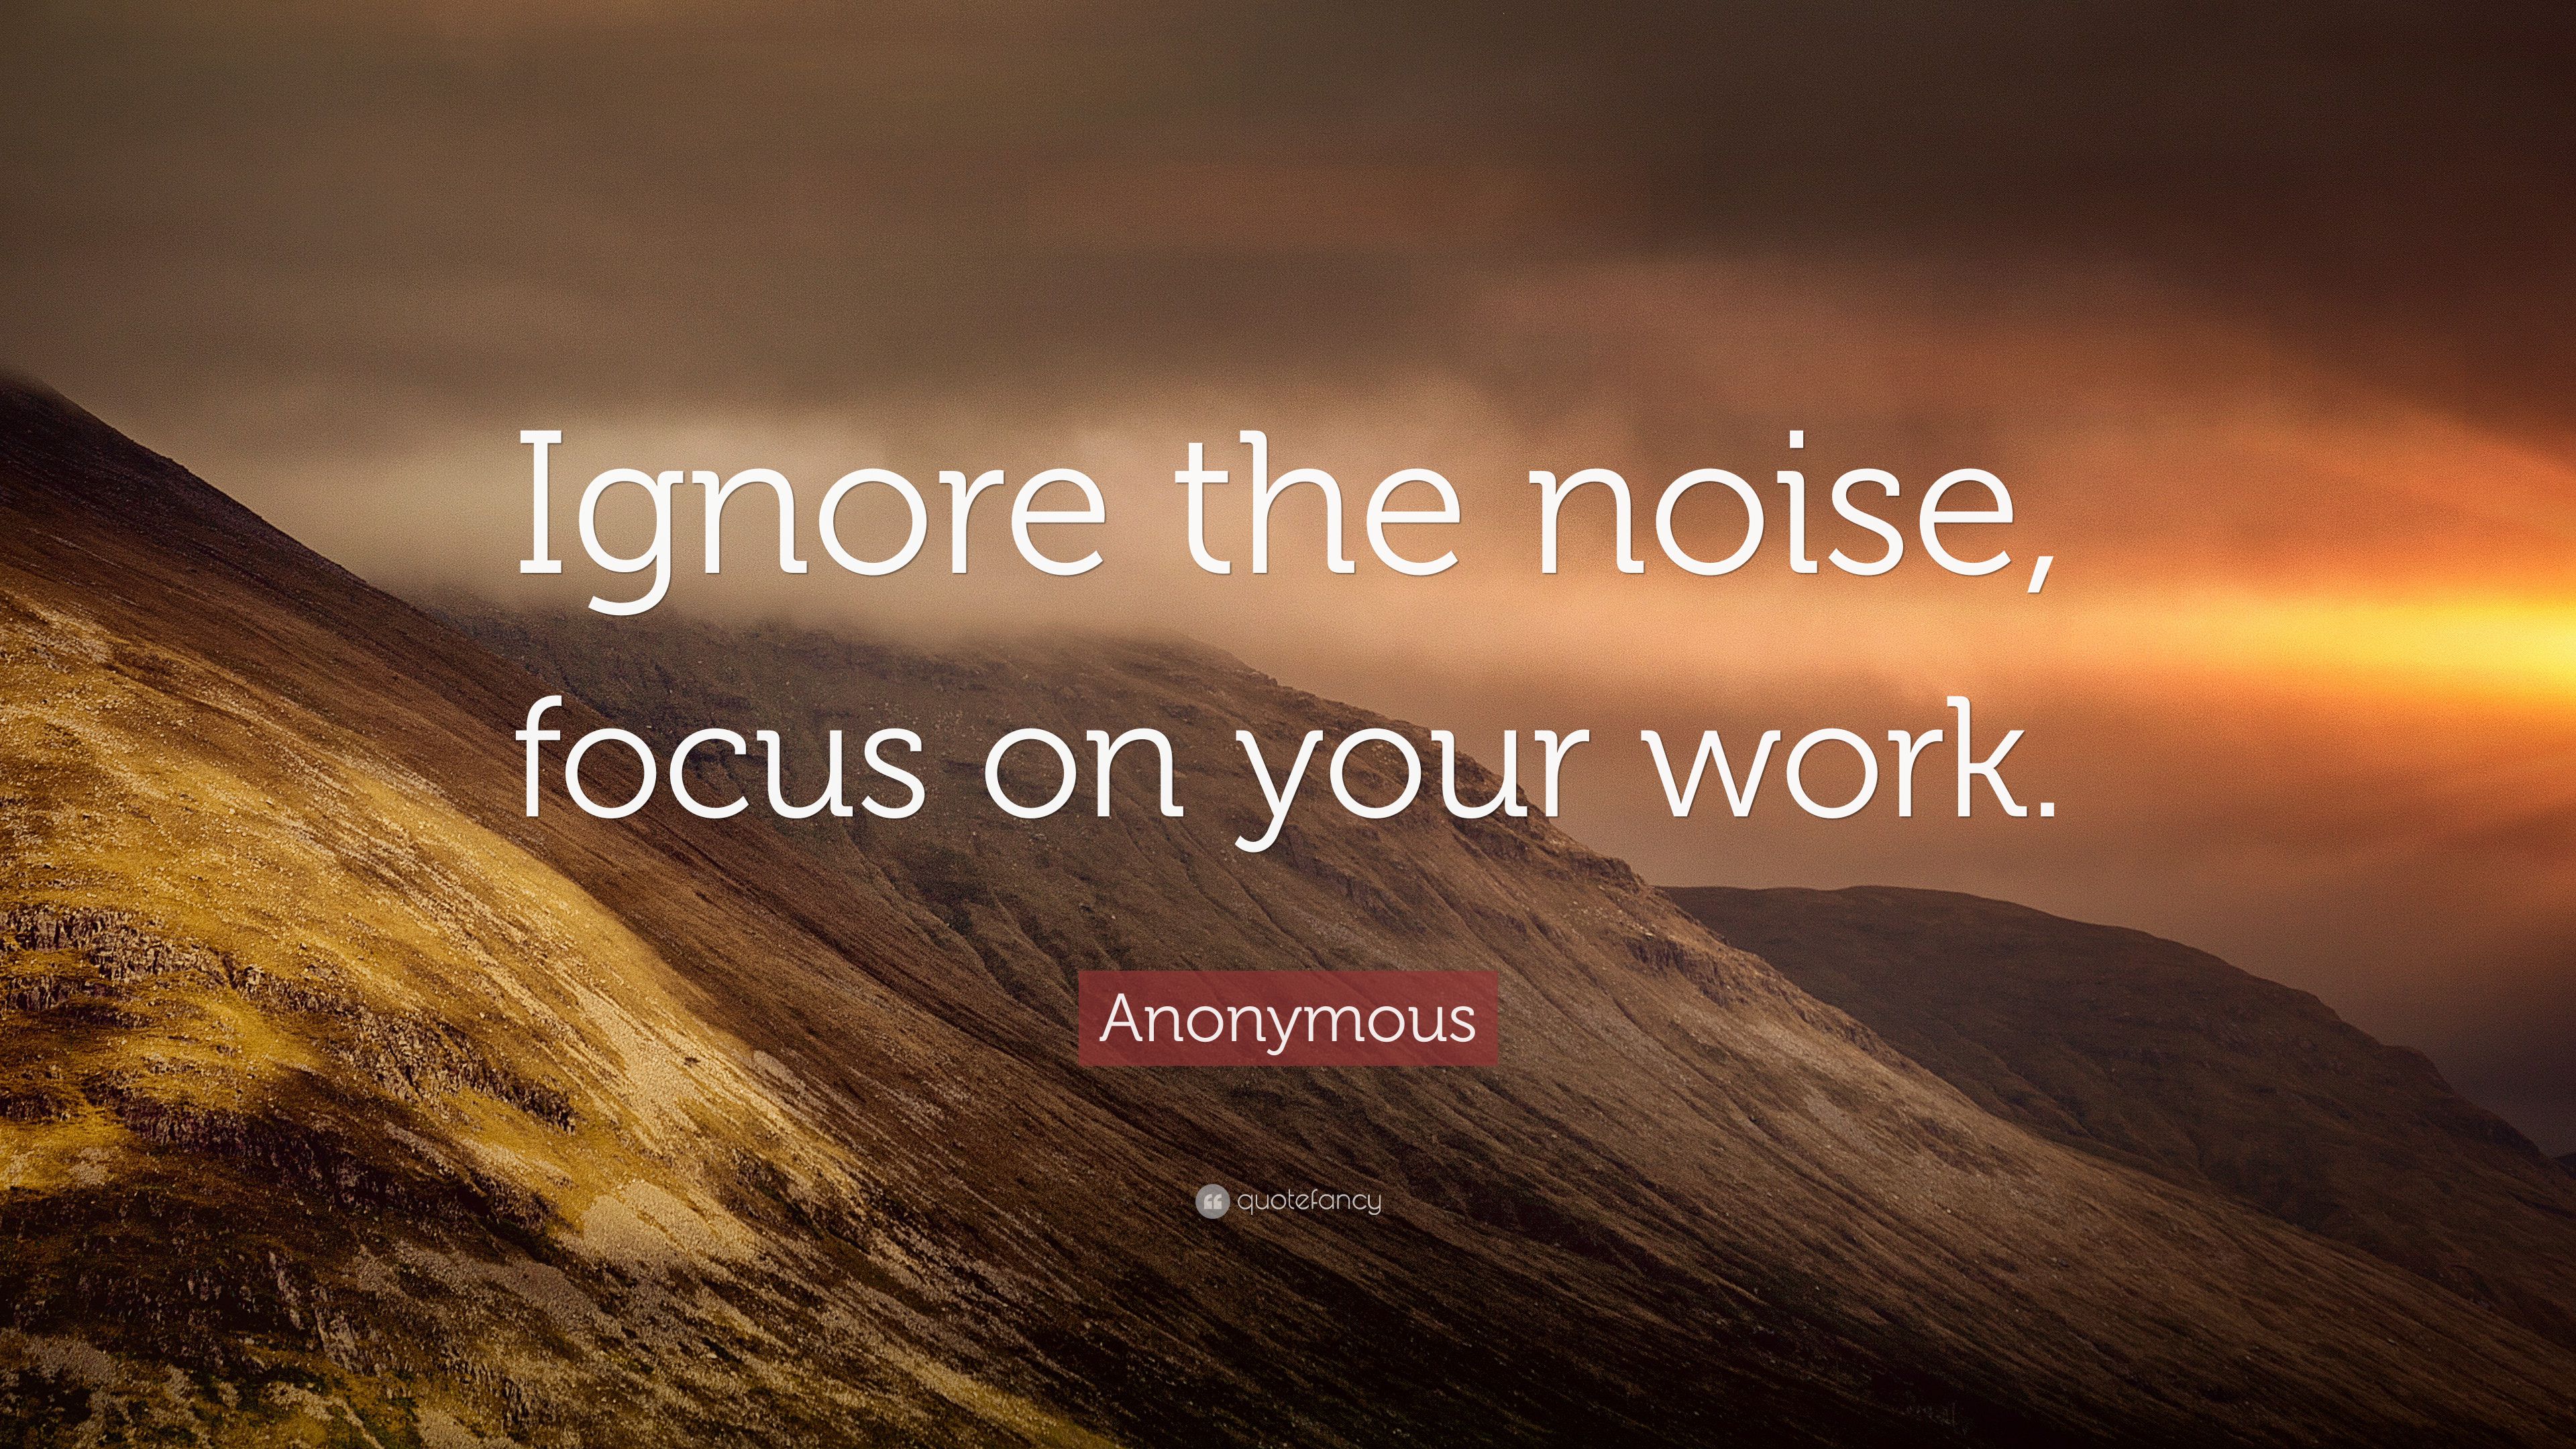 Anonymous Quote: “Ignore the noise, focus on your work.” 14